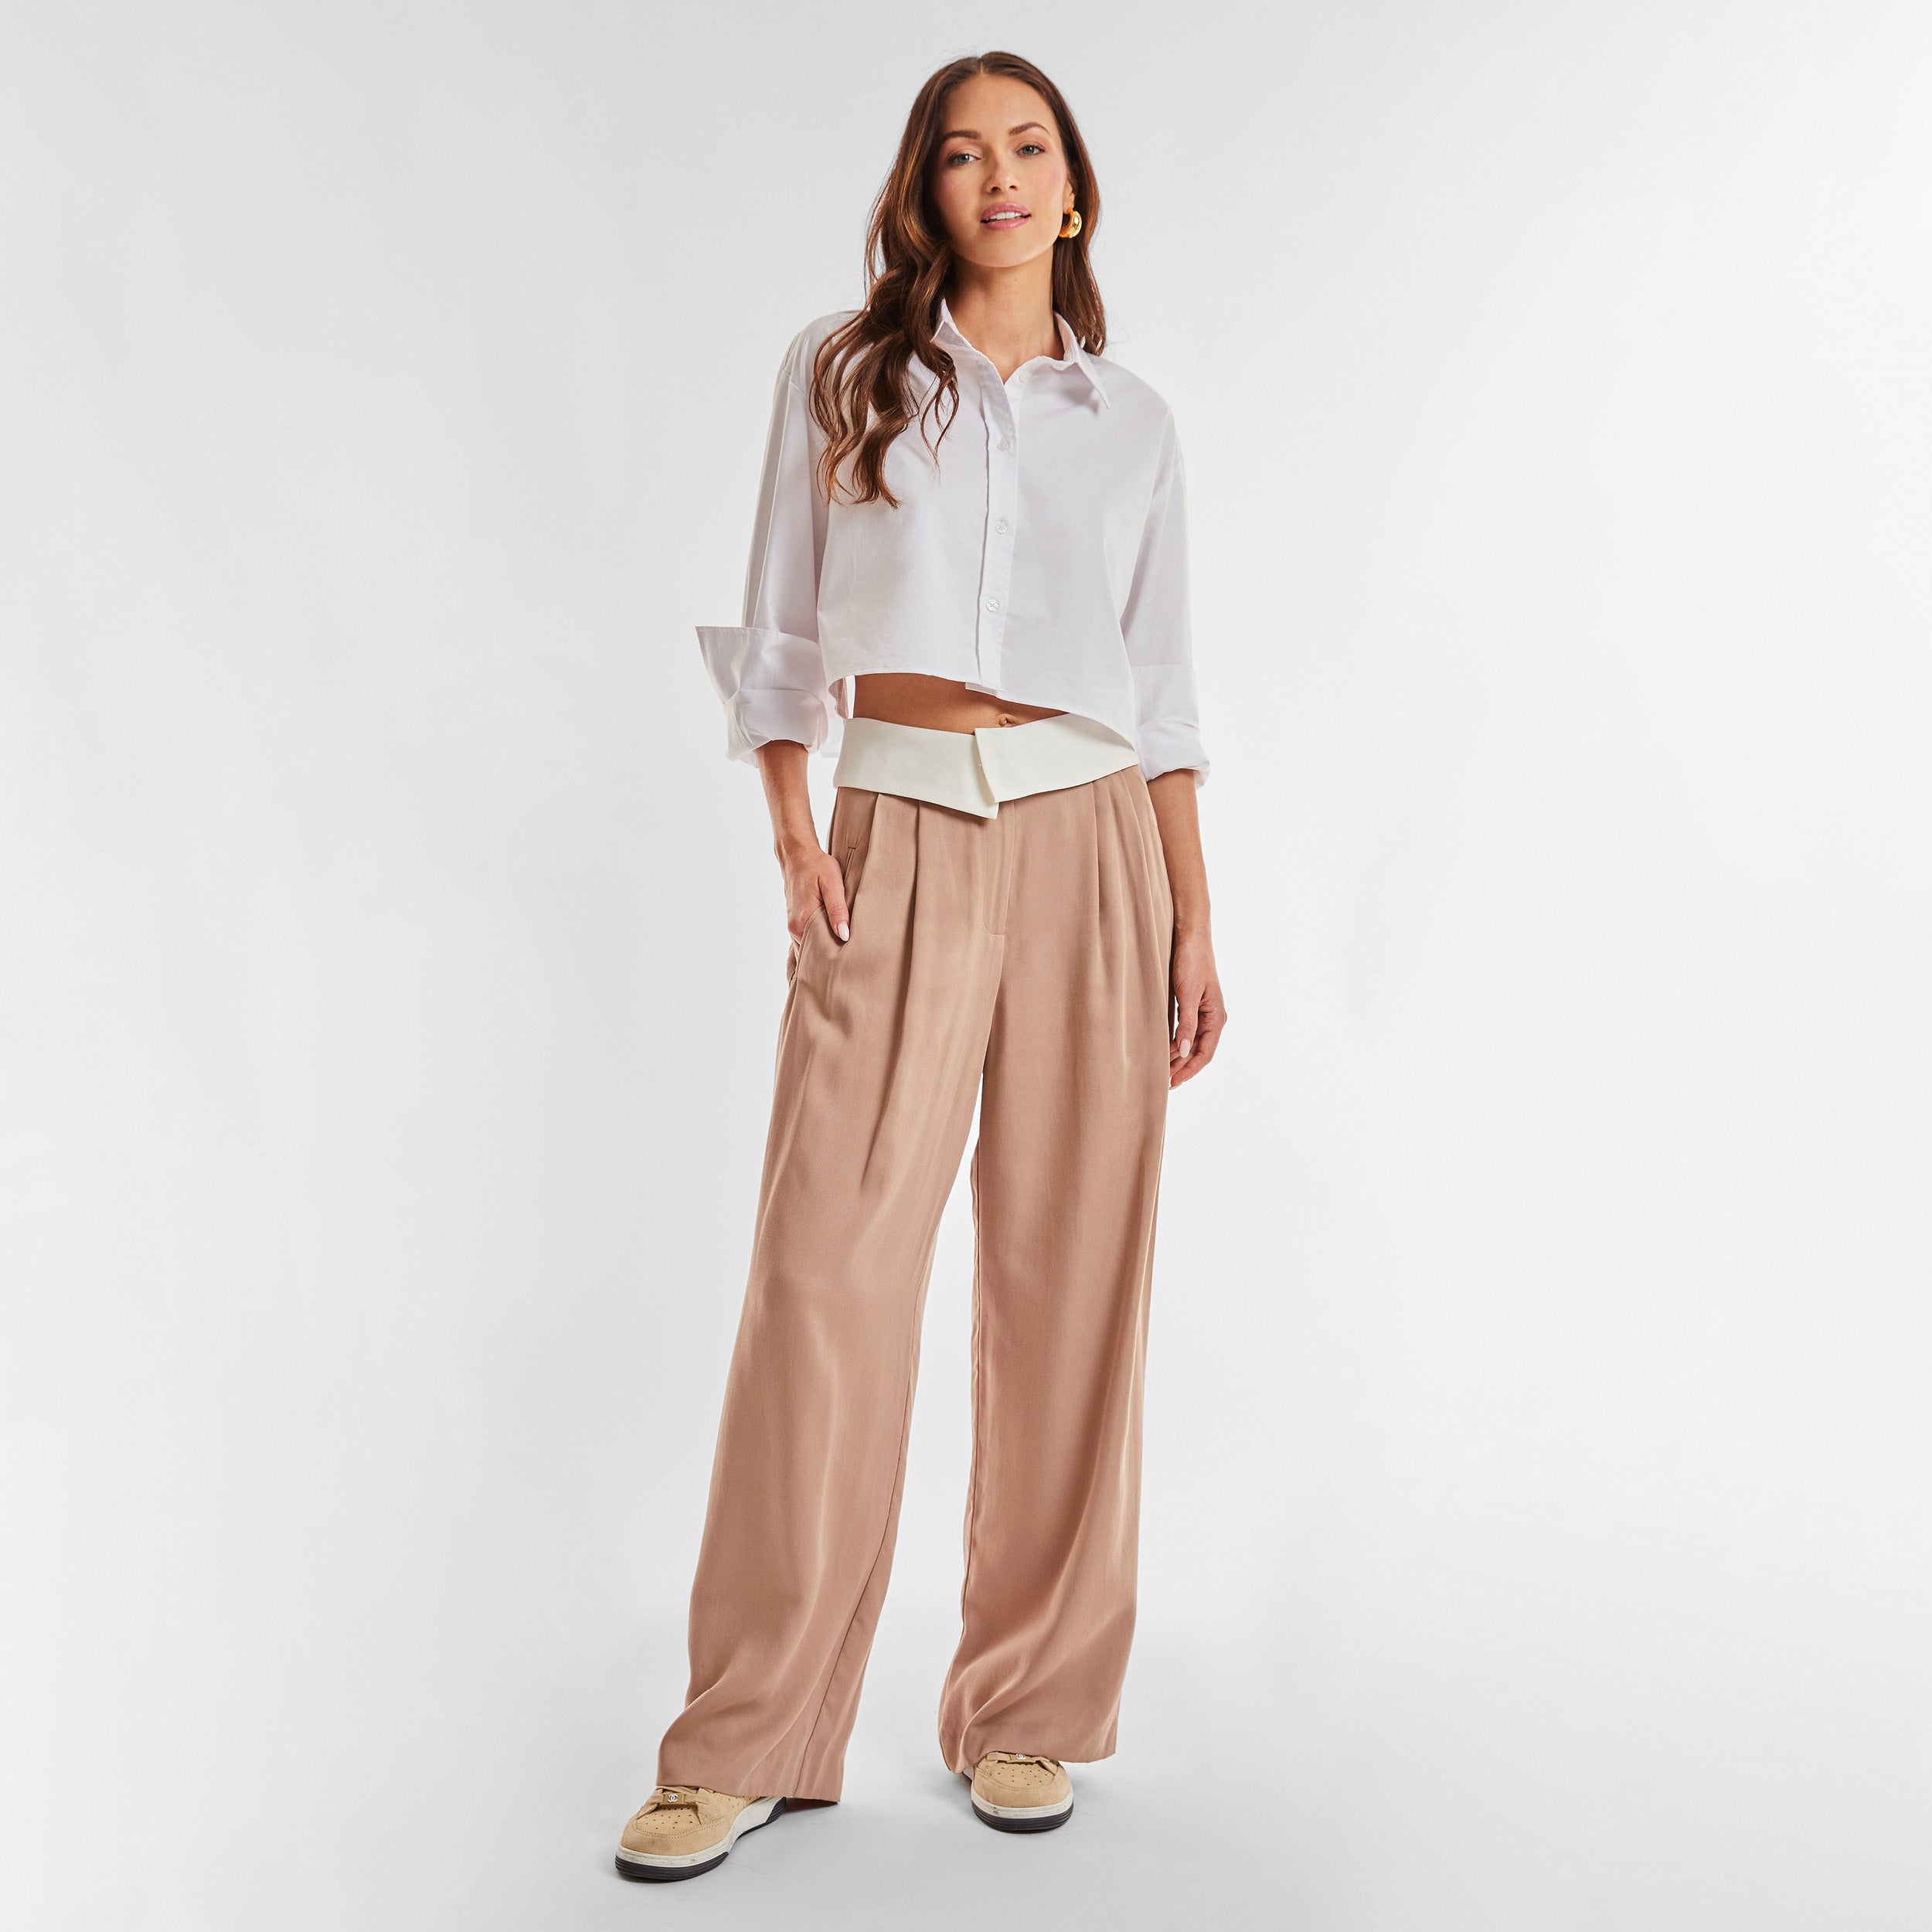 Full front view of woman wearing a cropped white buttonup shirt and foldover waist mocha colored pant